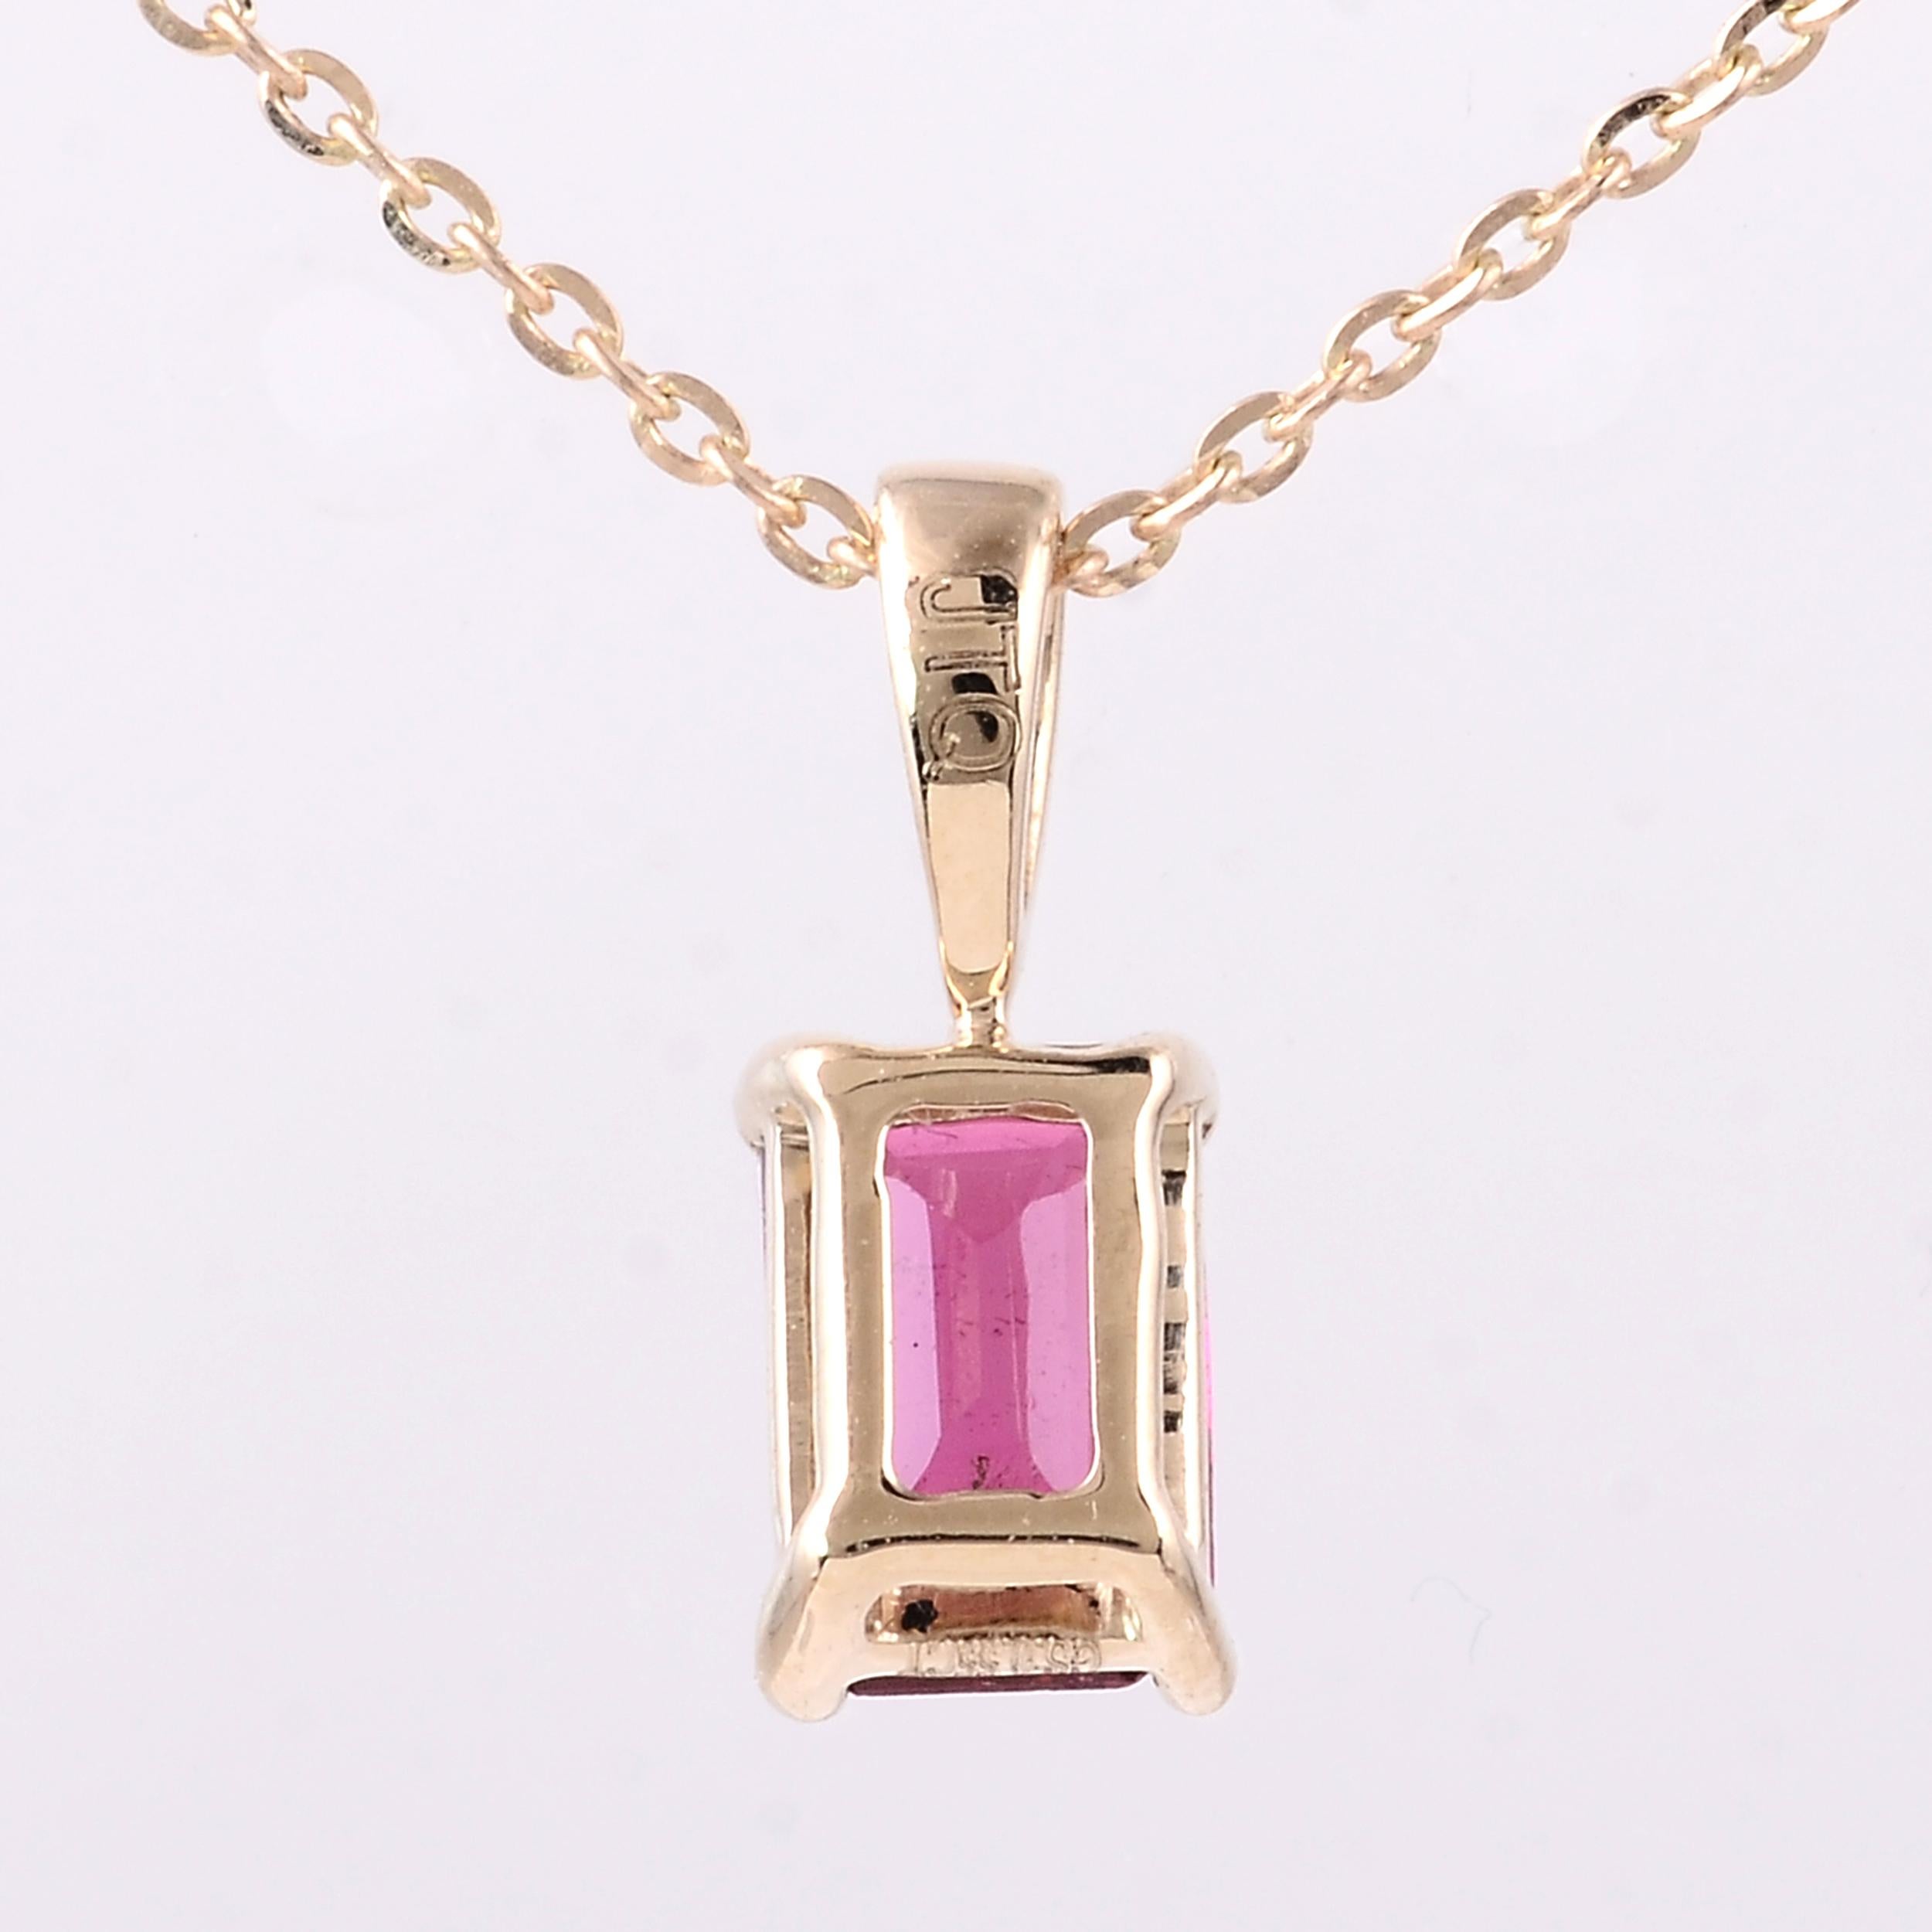 14K Tourmaline Pendant Necklace - Elegant Jewelry for Unique Style Statement In New Condition For Sale In Holtsville, NY